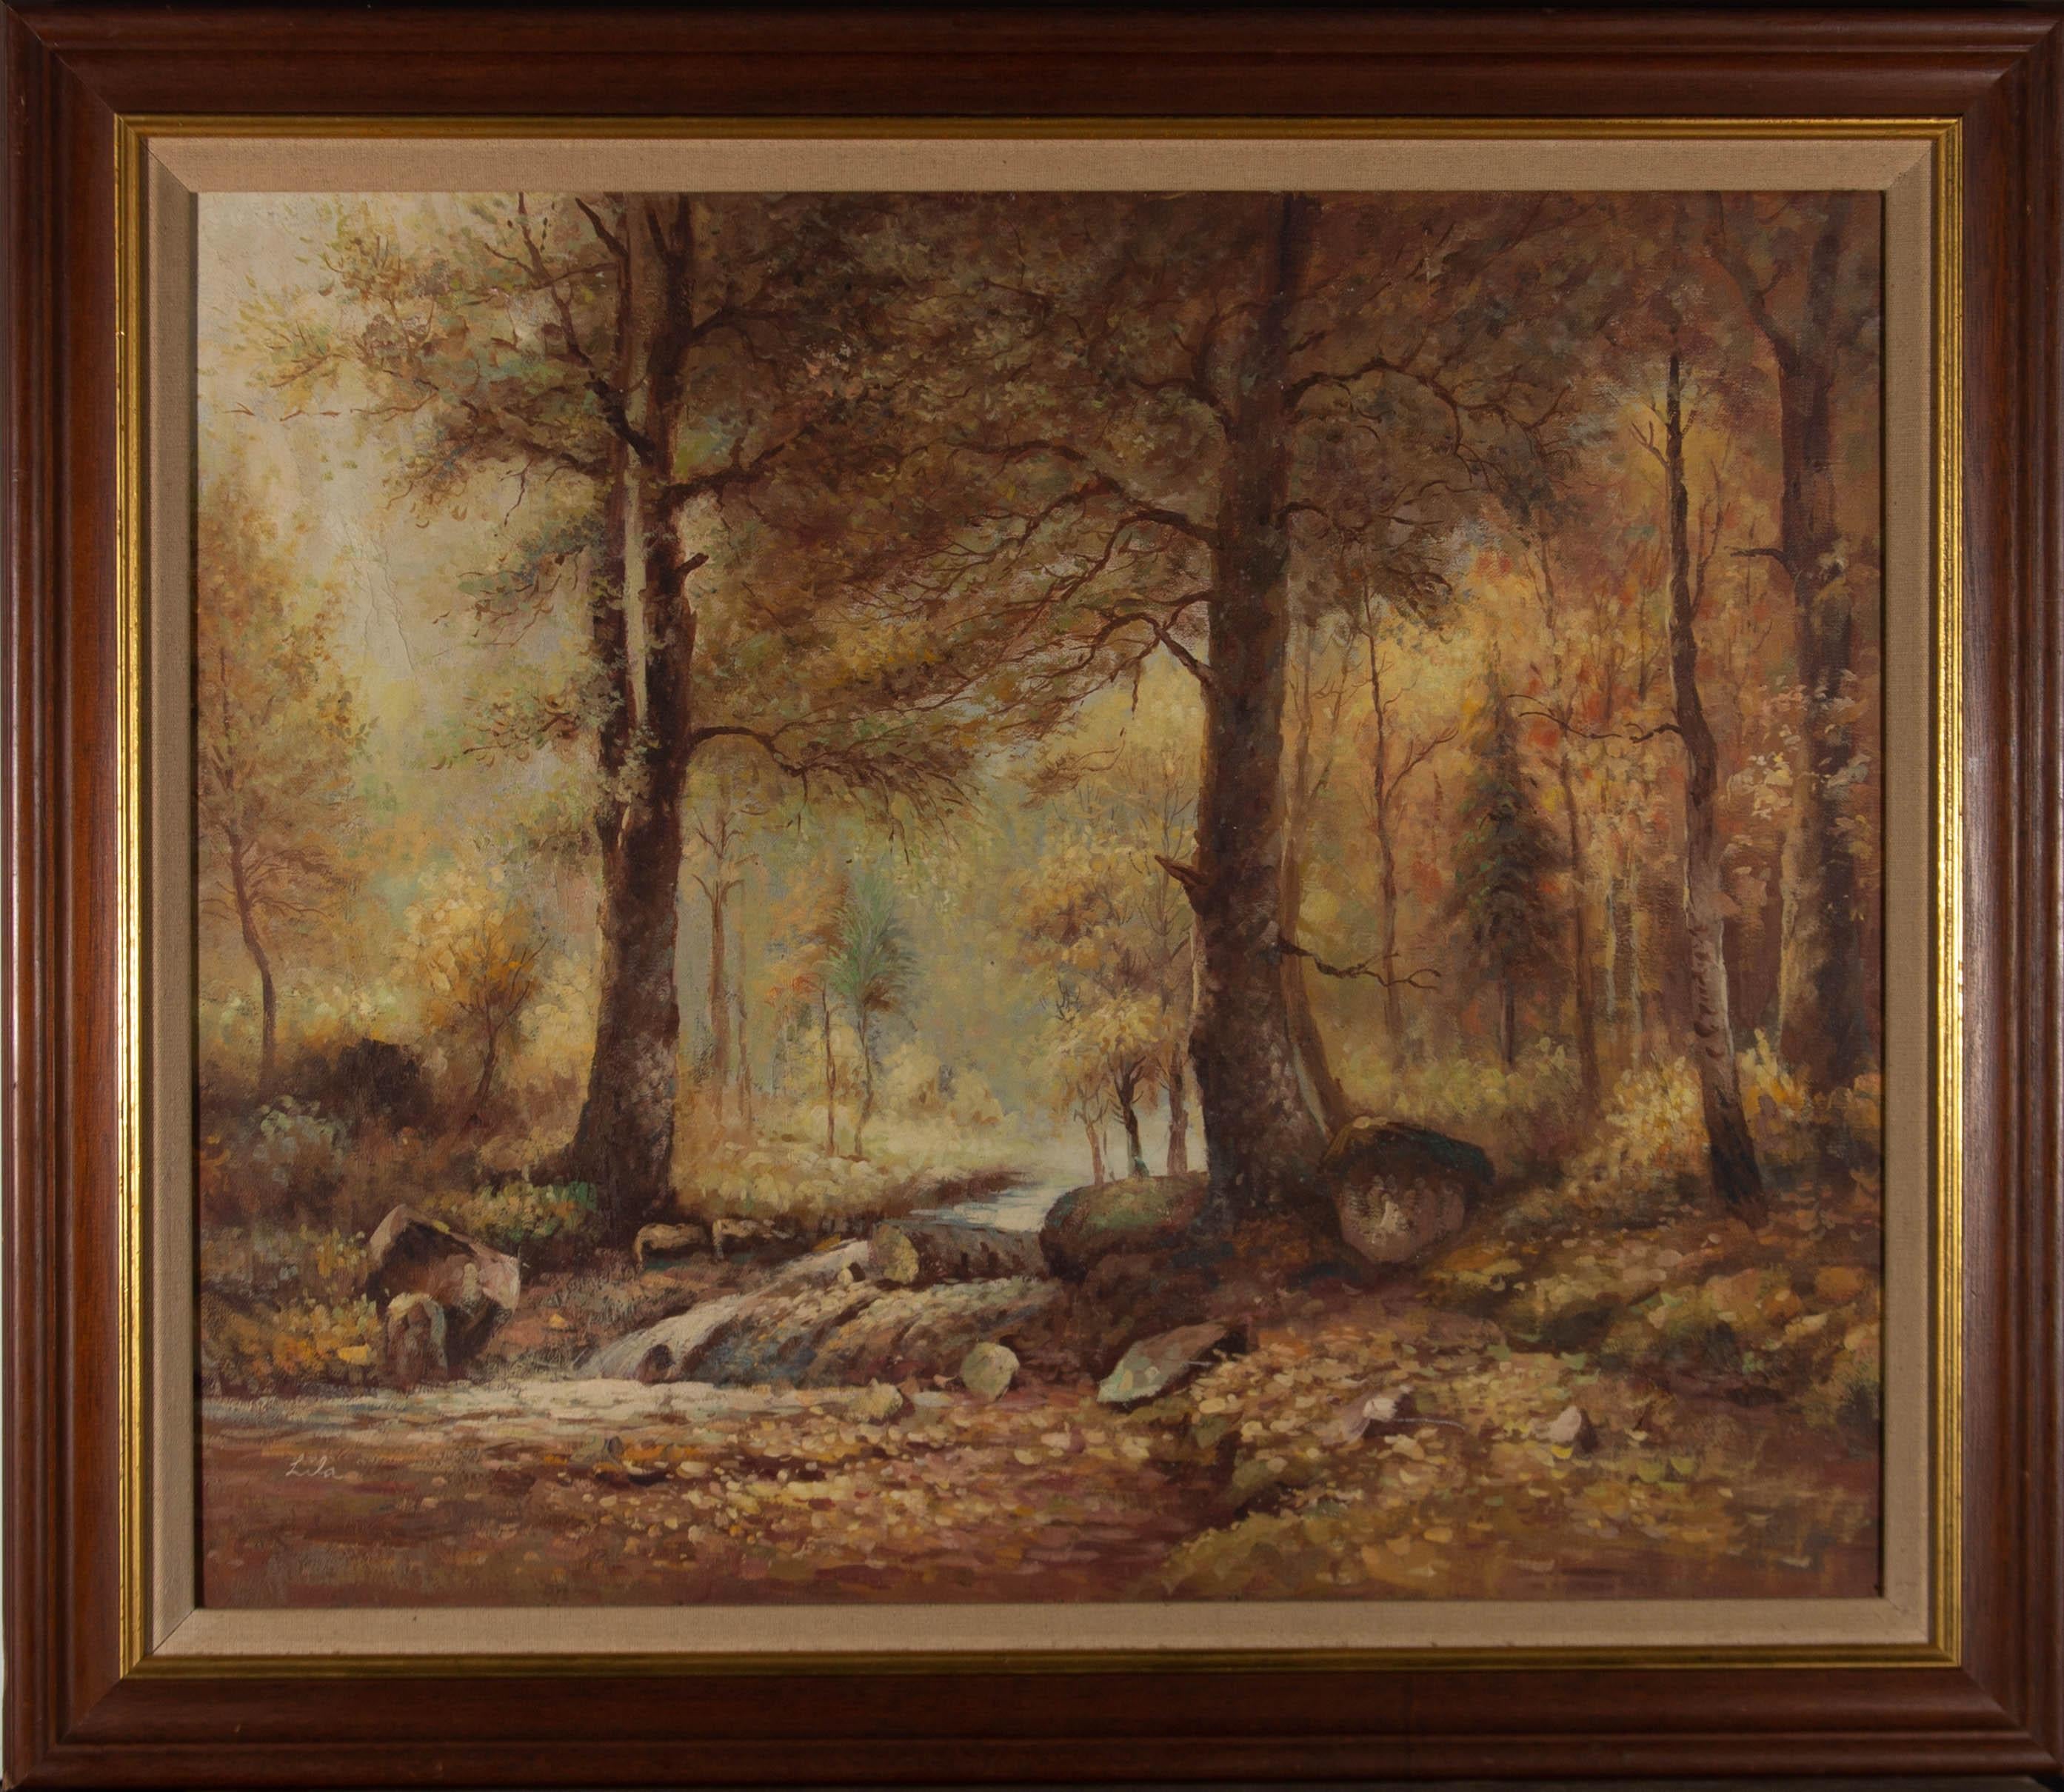 An atmospheric scene in an autumnal forest. Presented in a wooden frame with a gilt-effect inner edge and a linen slip. Signed to the lower-left corner. On canvas on stretchers.
